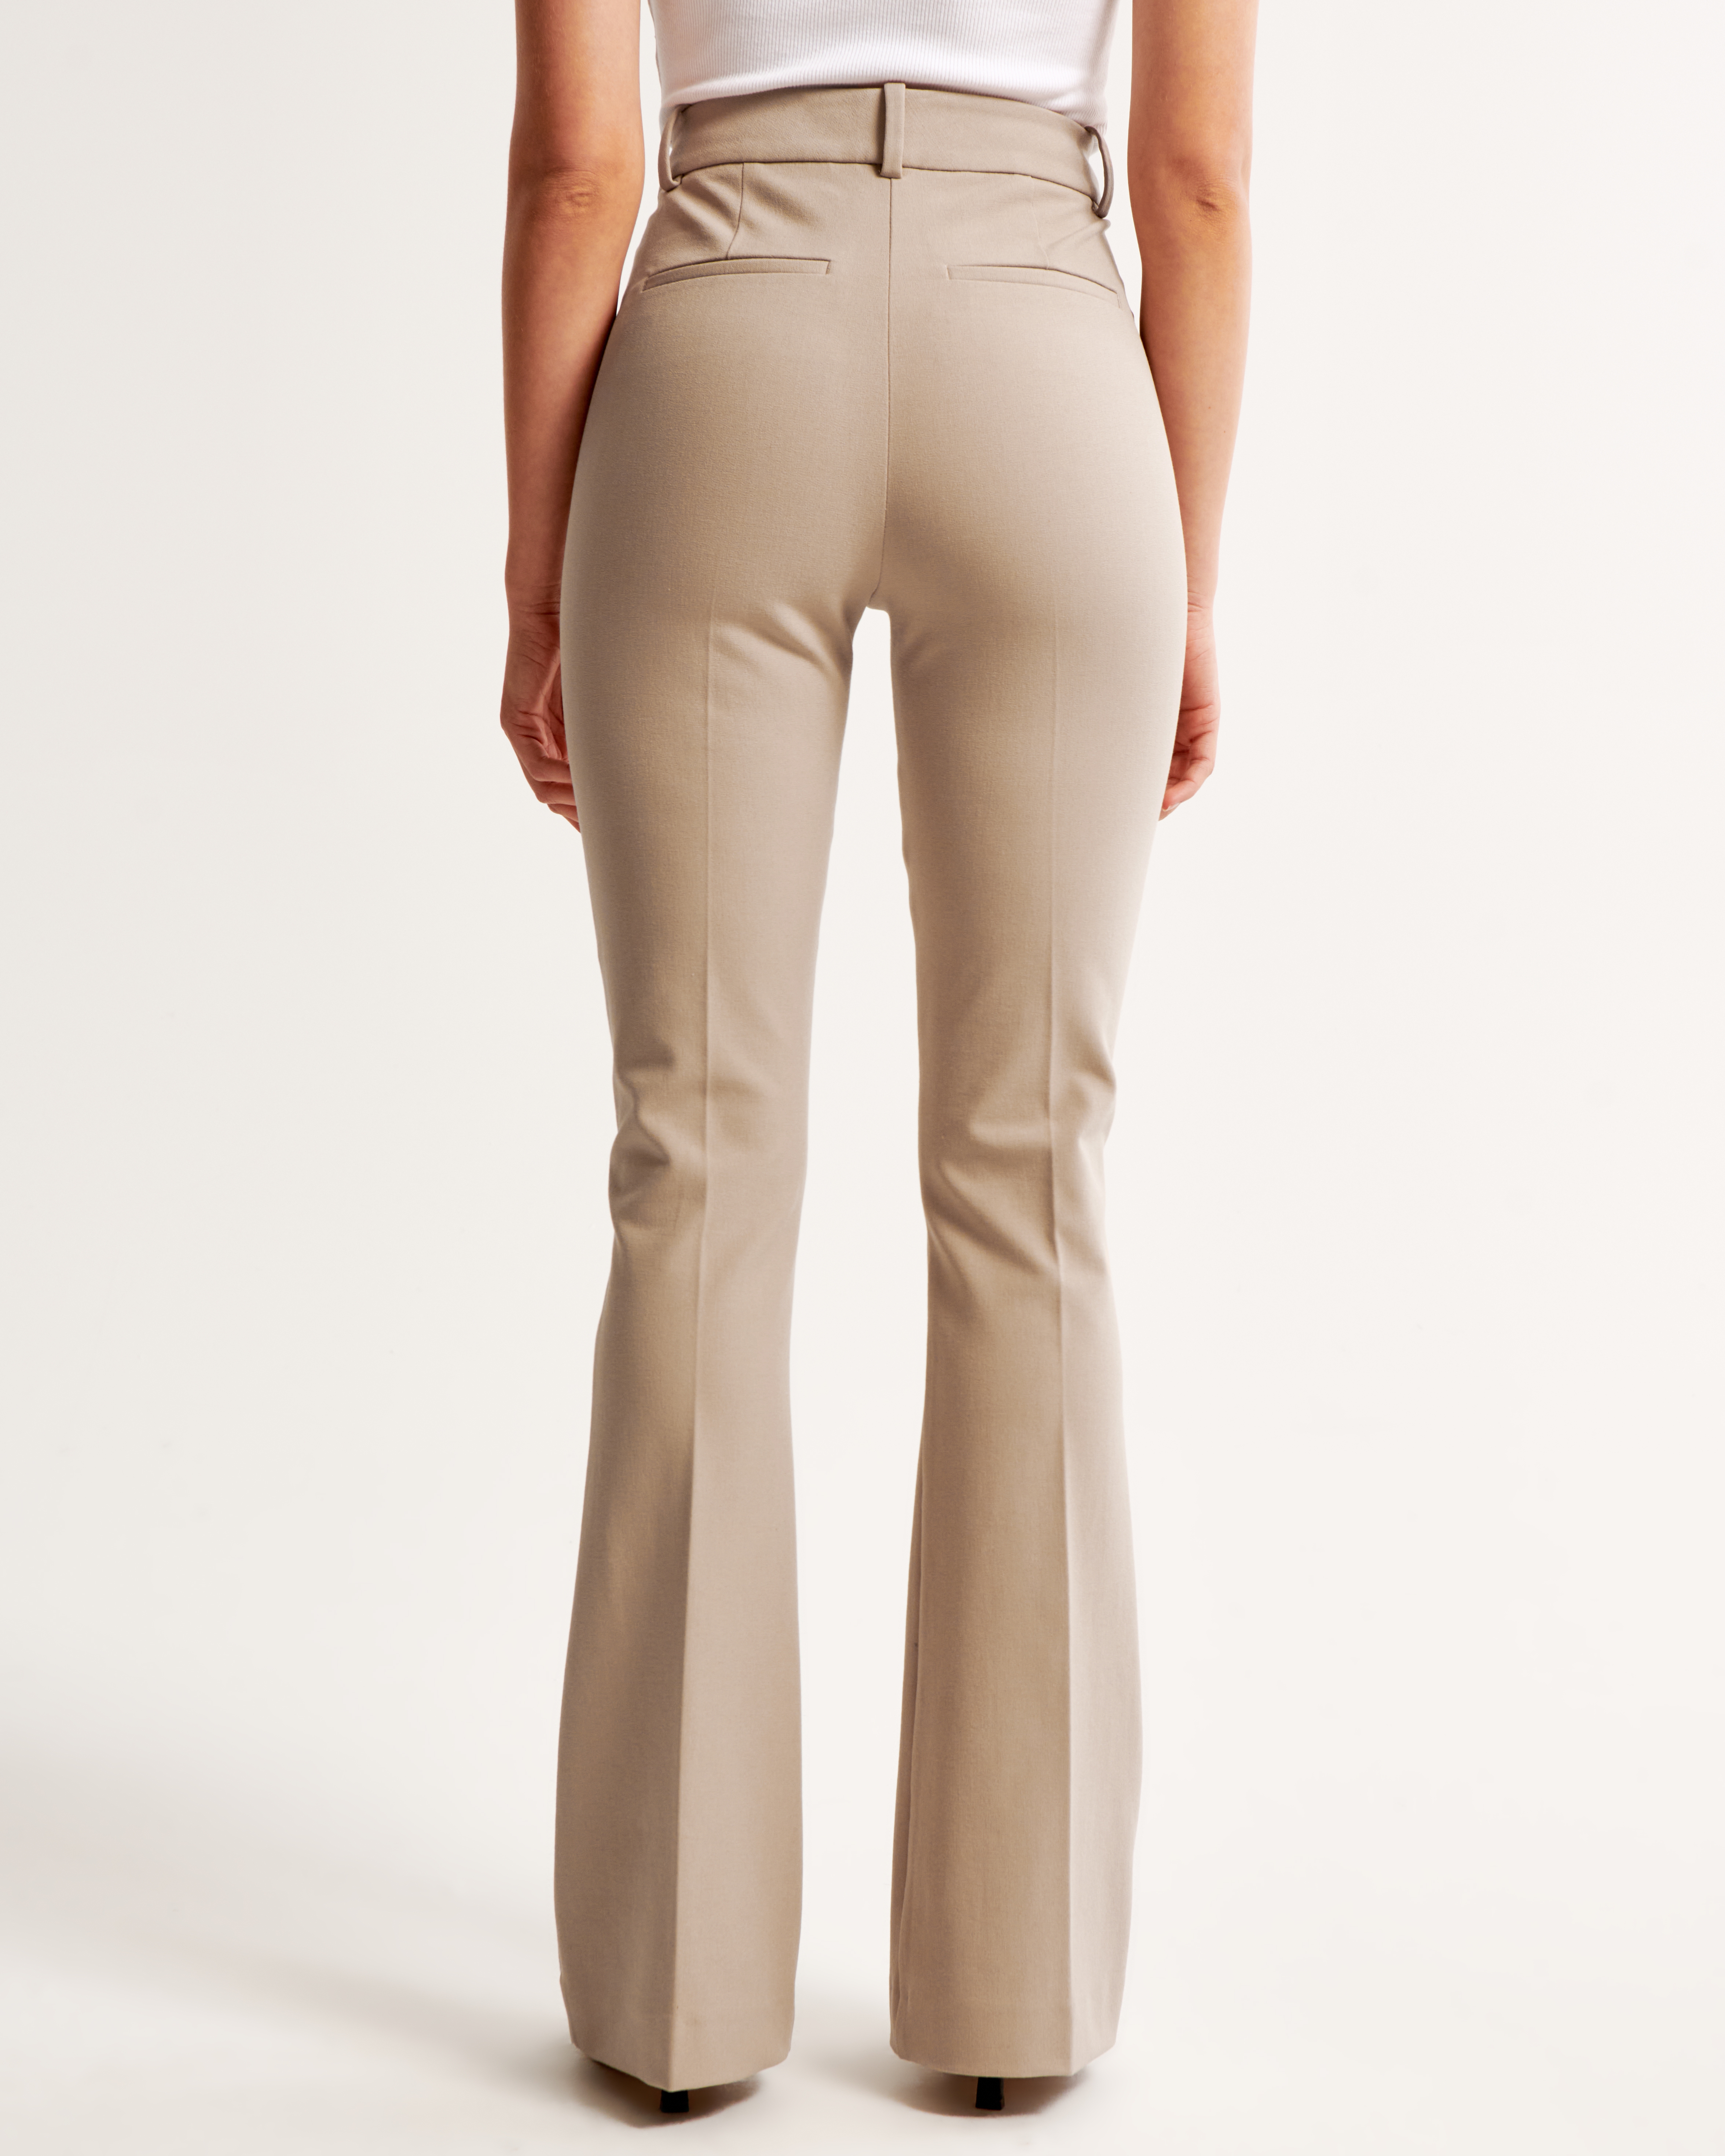 Women's High Rise Flare Pant in Clay Brown | Size 31 | Abercrombie u0026 Fitch